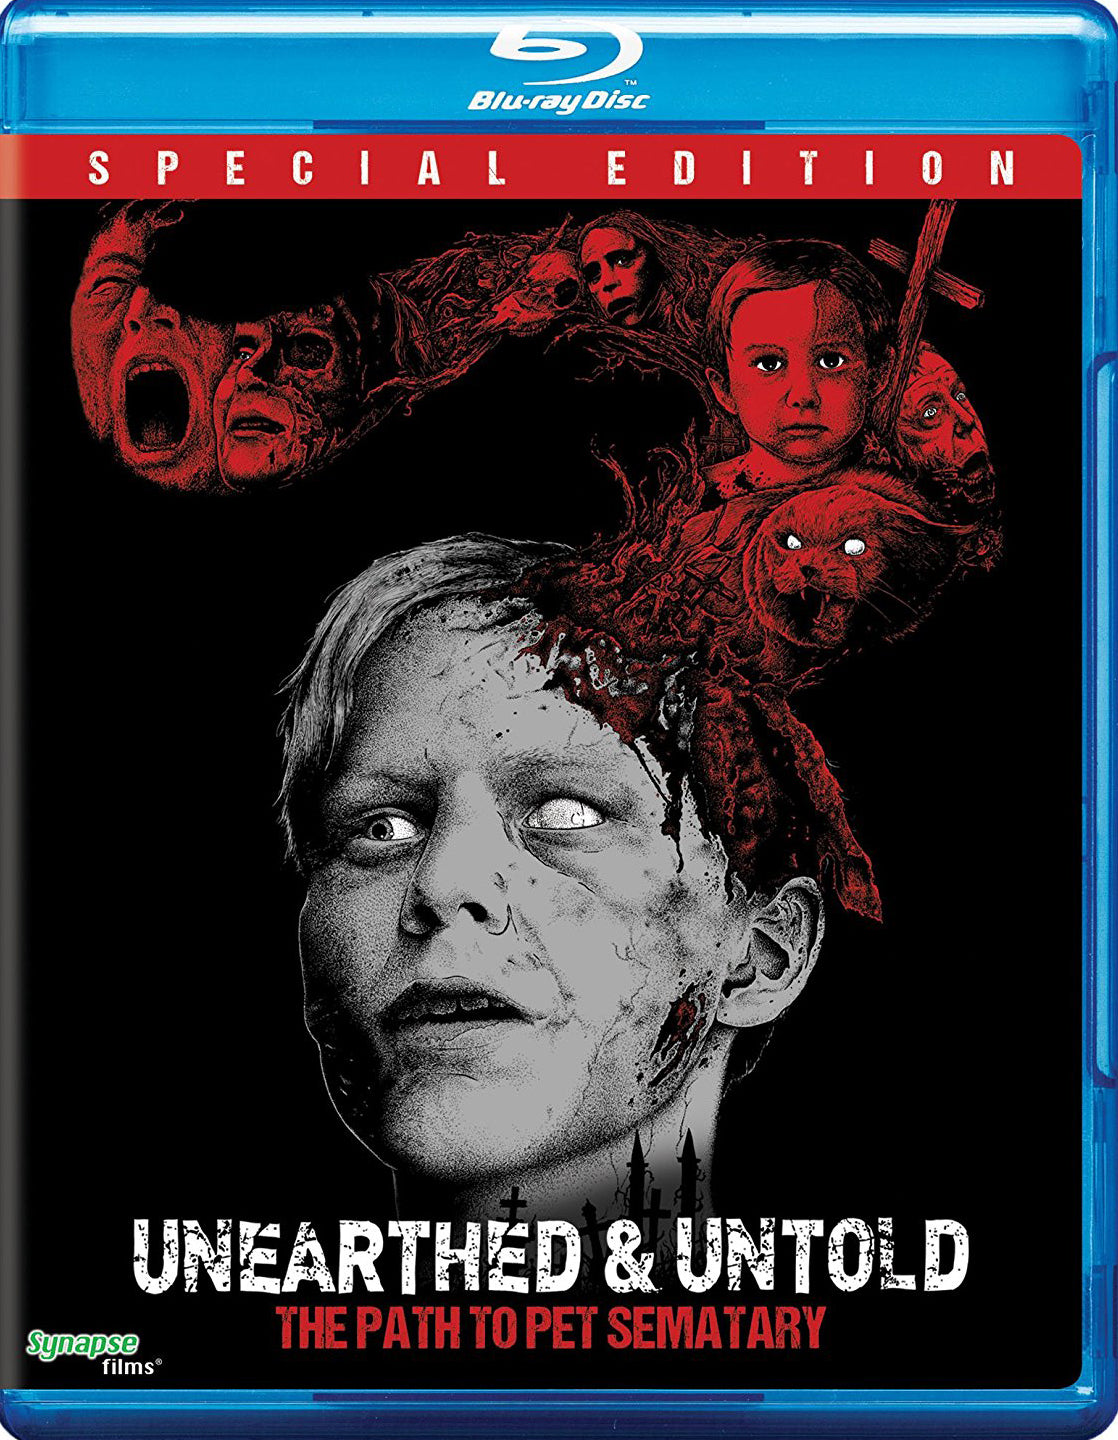 Unearthed & Untold: The Path to Pet Sematary [Blu-ray] cover art